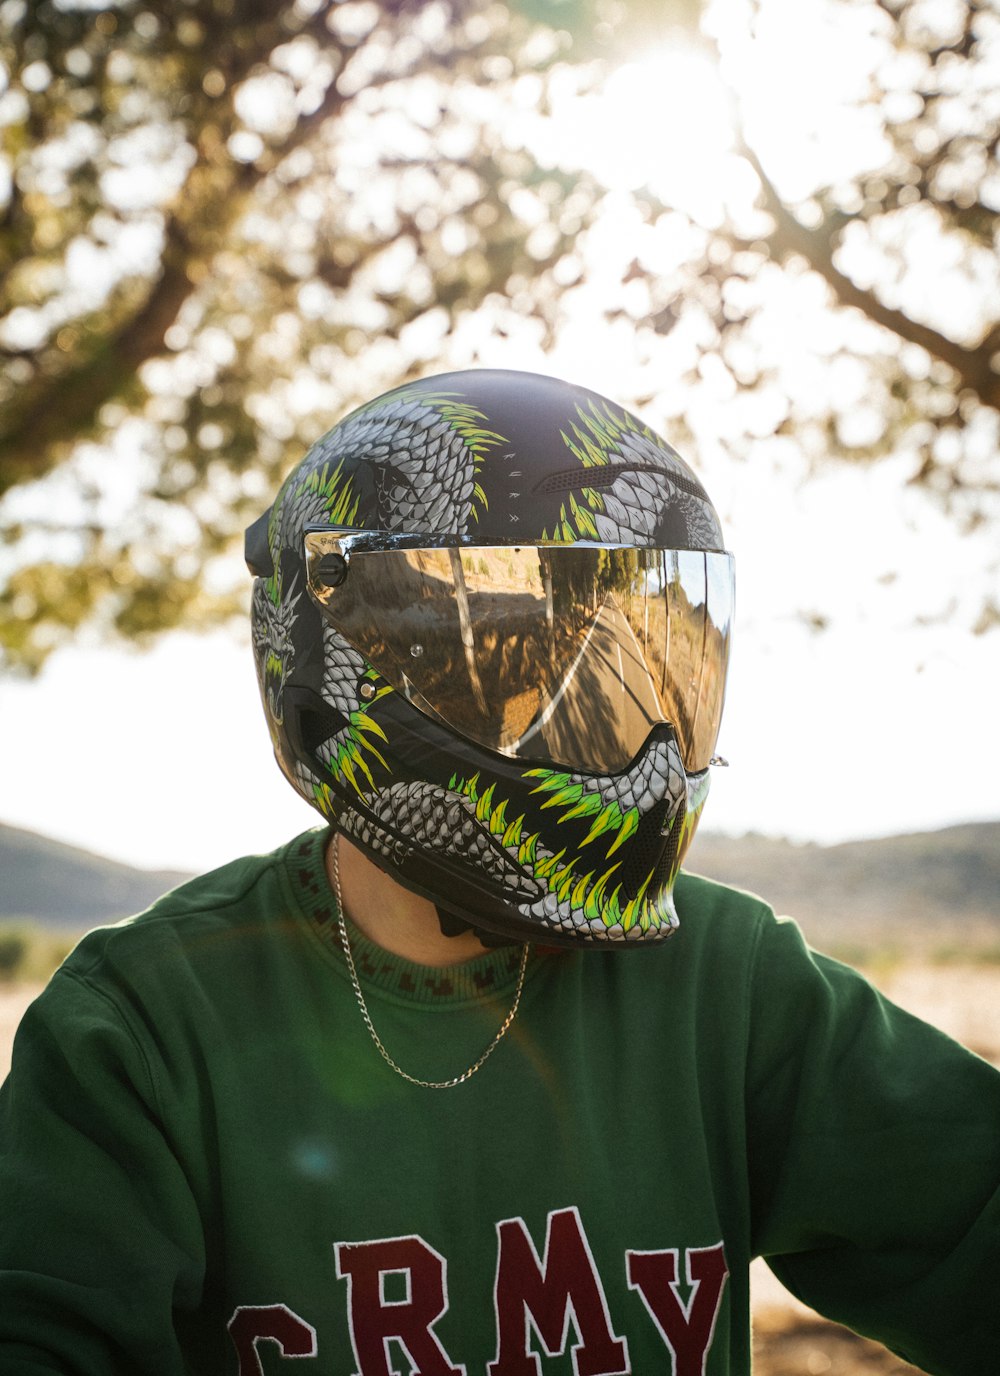 a person wearing a helmet and a green shirt